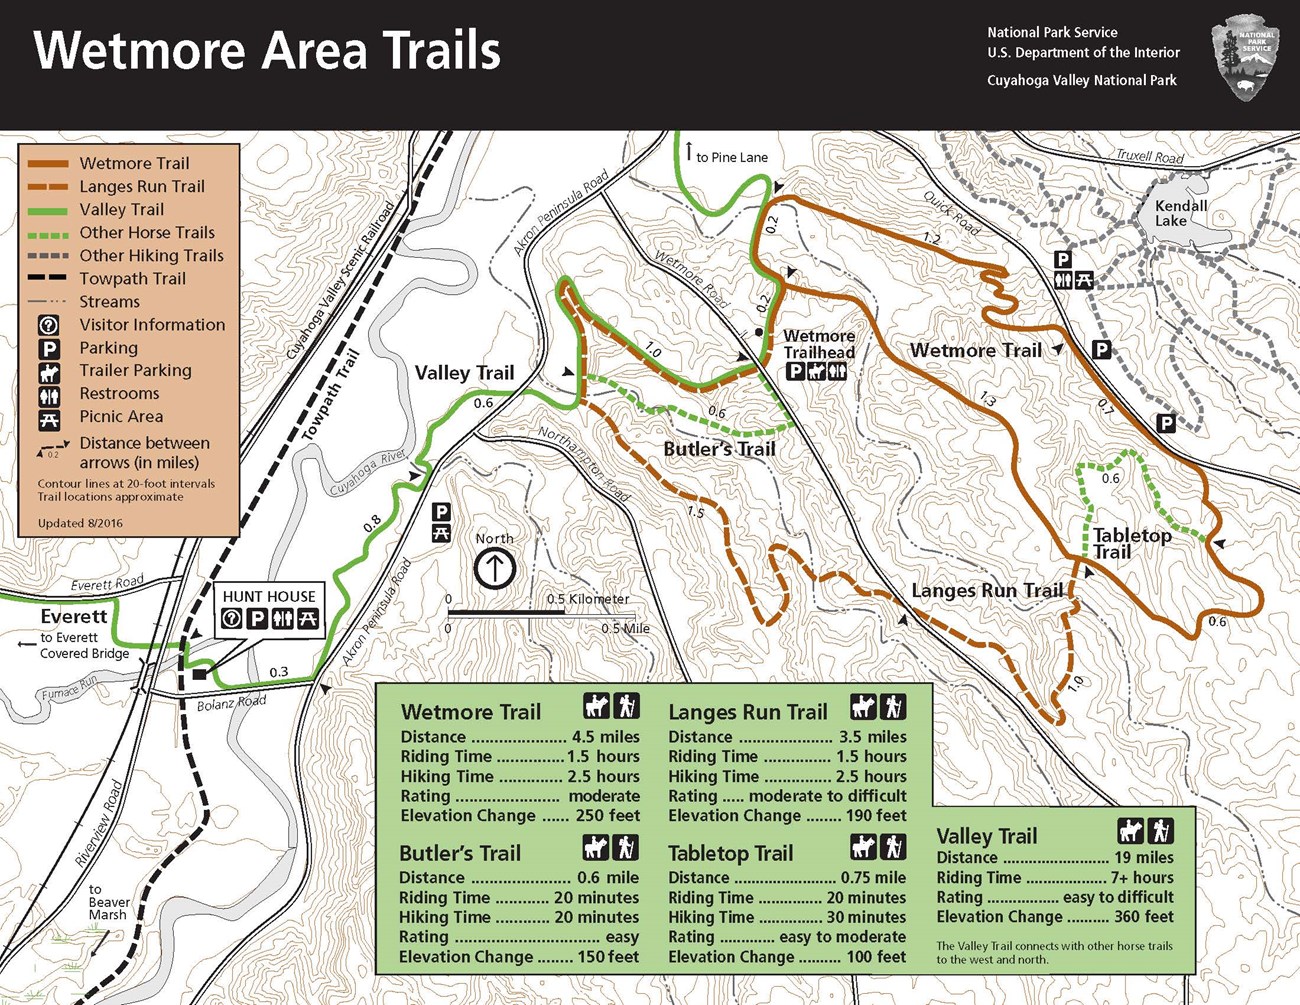 Wetmore Area trails allow horses and hikers. Wetmore, 4.5 miles, 250 ft elevation change. Butler’s, 0.6 miles each way, 150 ft elevation change. Langes Run, 3.5 miles, 190 ft elevation change. Tabletop, 0.75 miles each way, 100 ft elevation change.